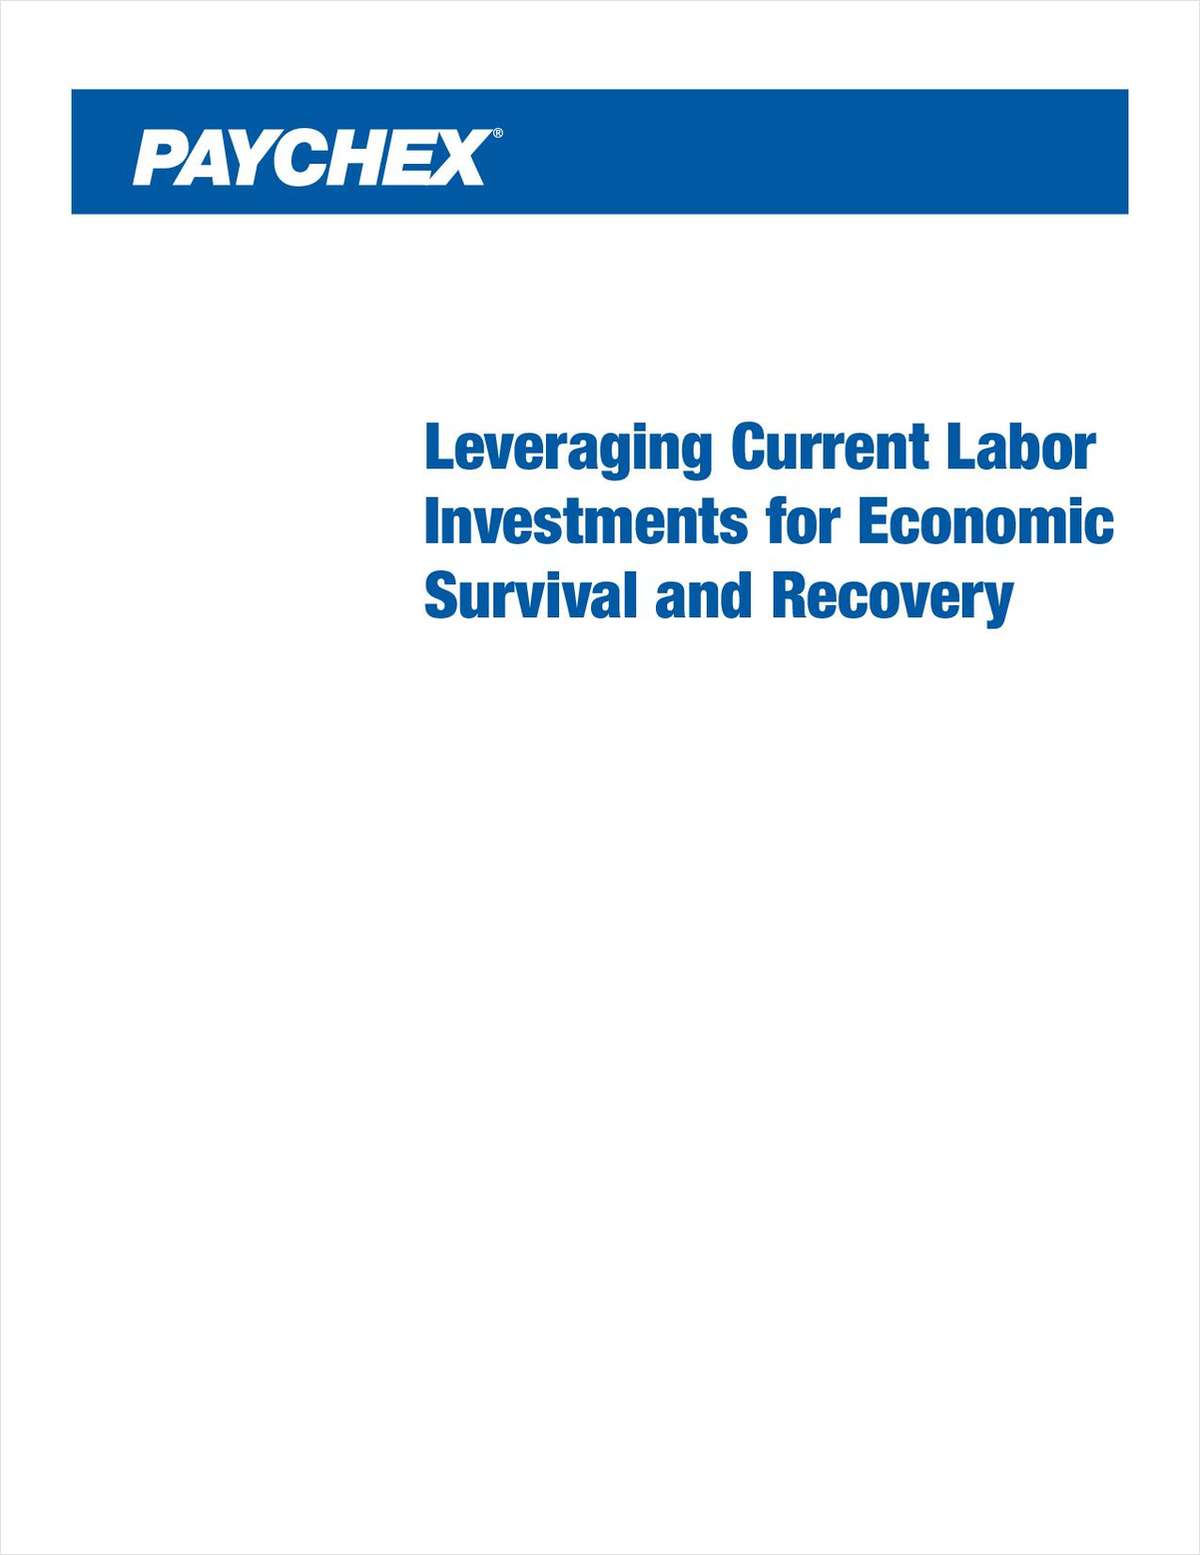 Leveraging Current Labor Investments for Economic Survival and Recovery